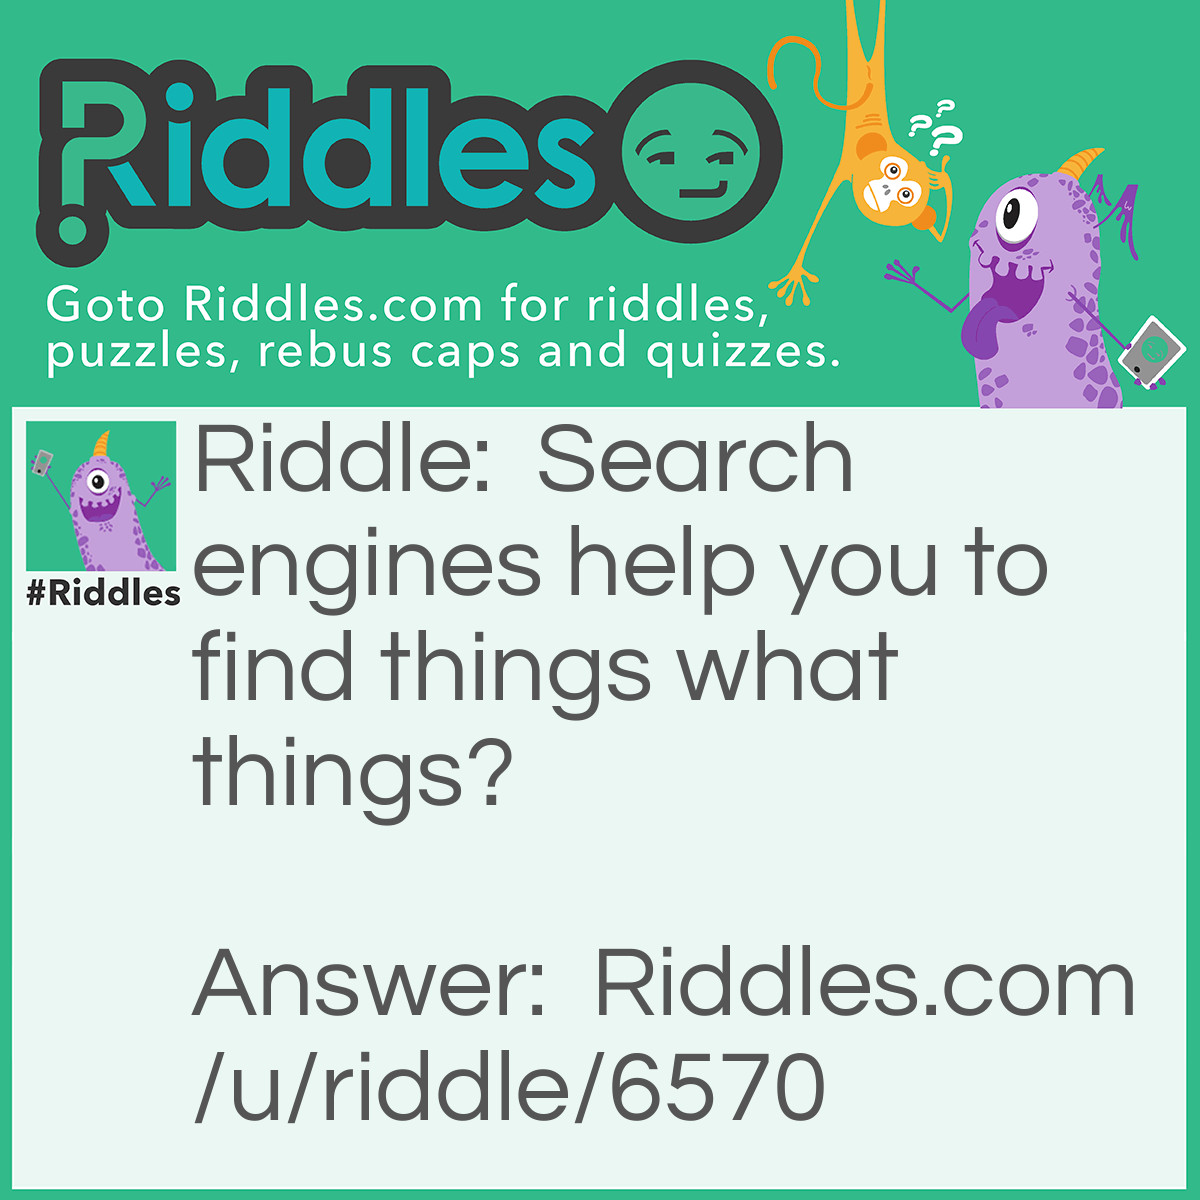 Riddle: Search engines help you to find things what things? Answer: find other web sites.